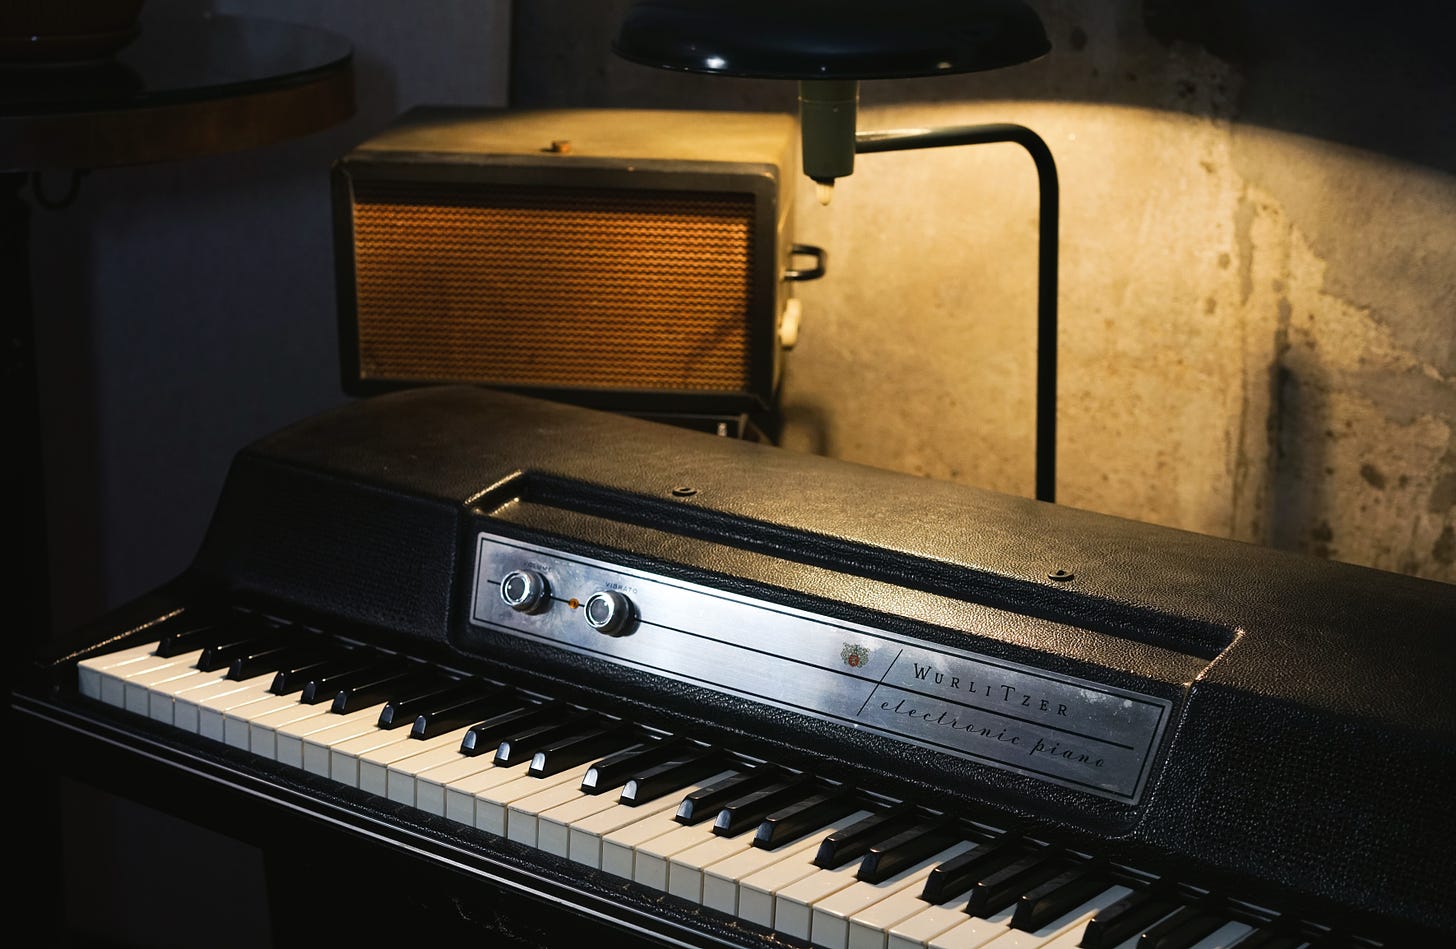 Wurlitzer 203w with the keys illuminated by a vintage flying saucer lamp.